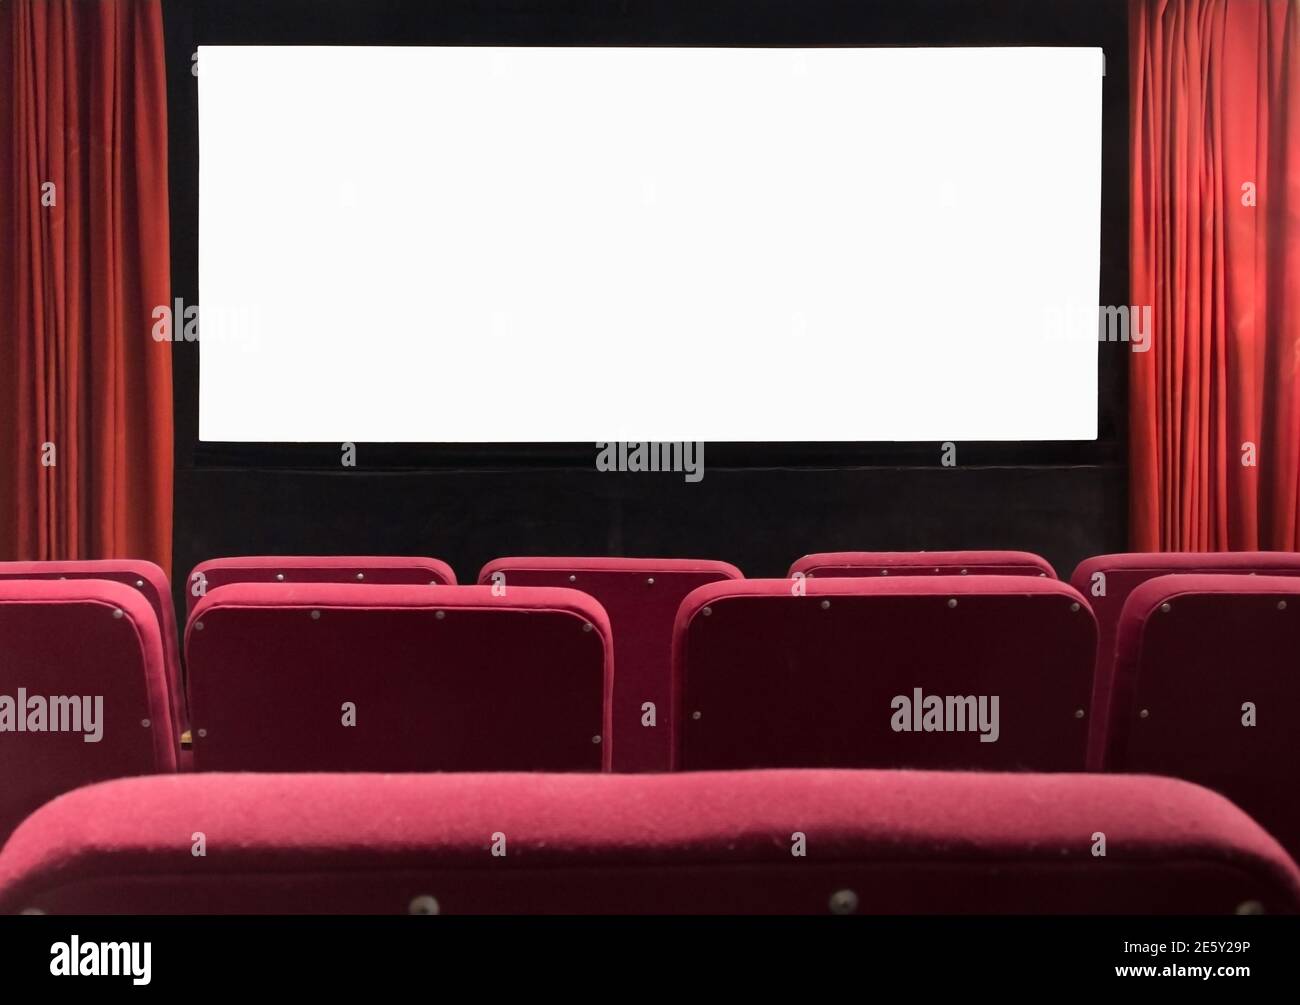 Movie cinema screen with empty seats and red curtains Stock Photo